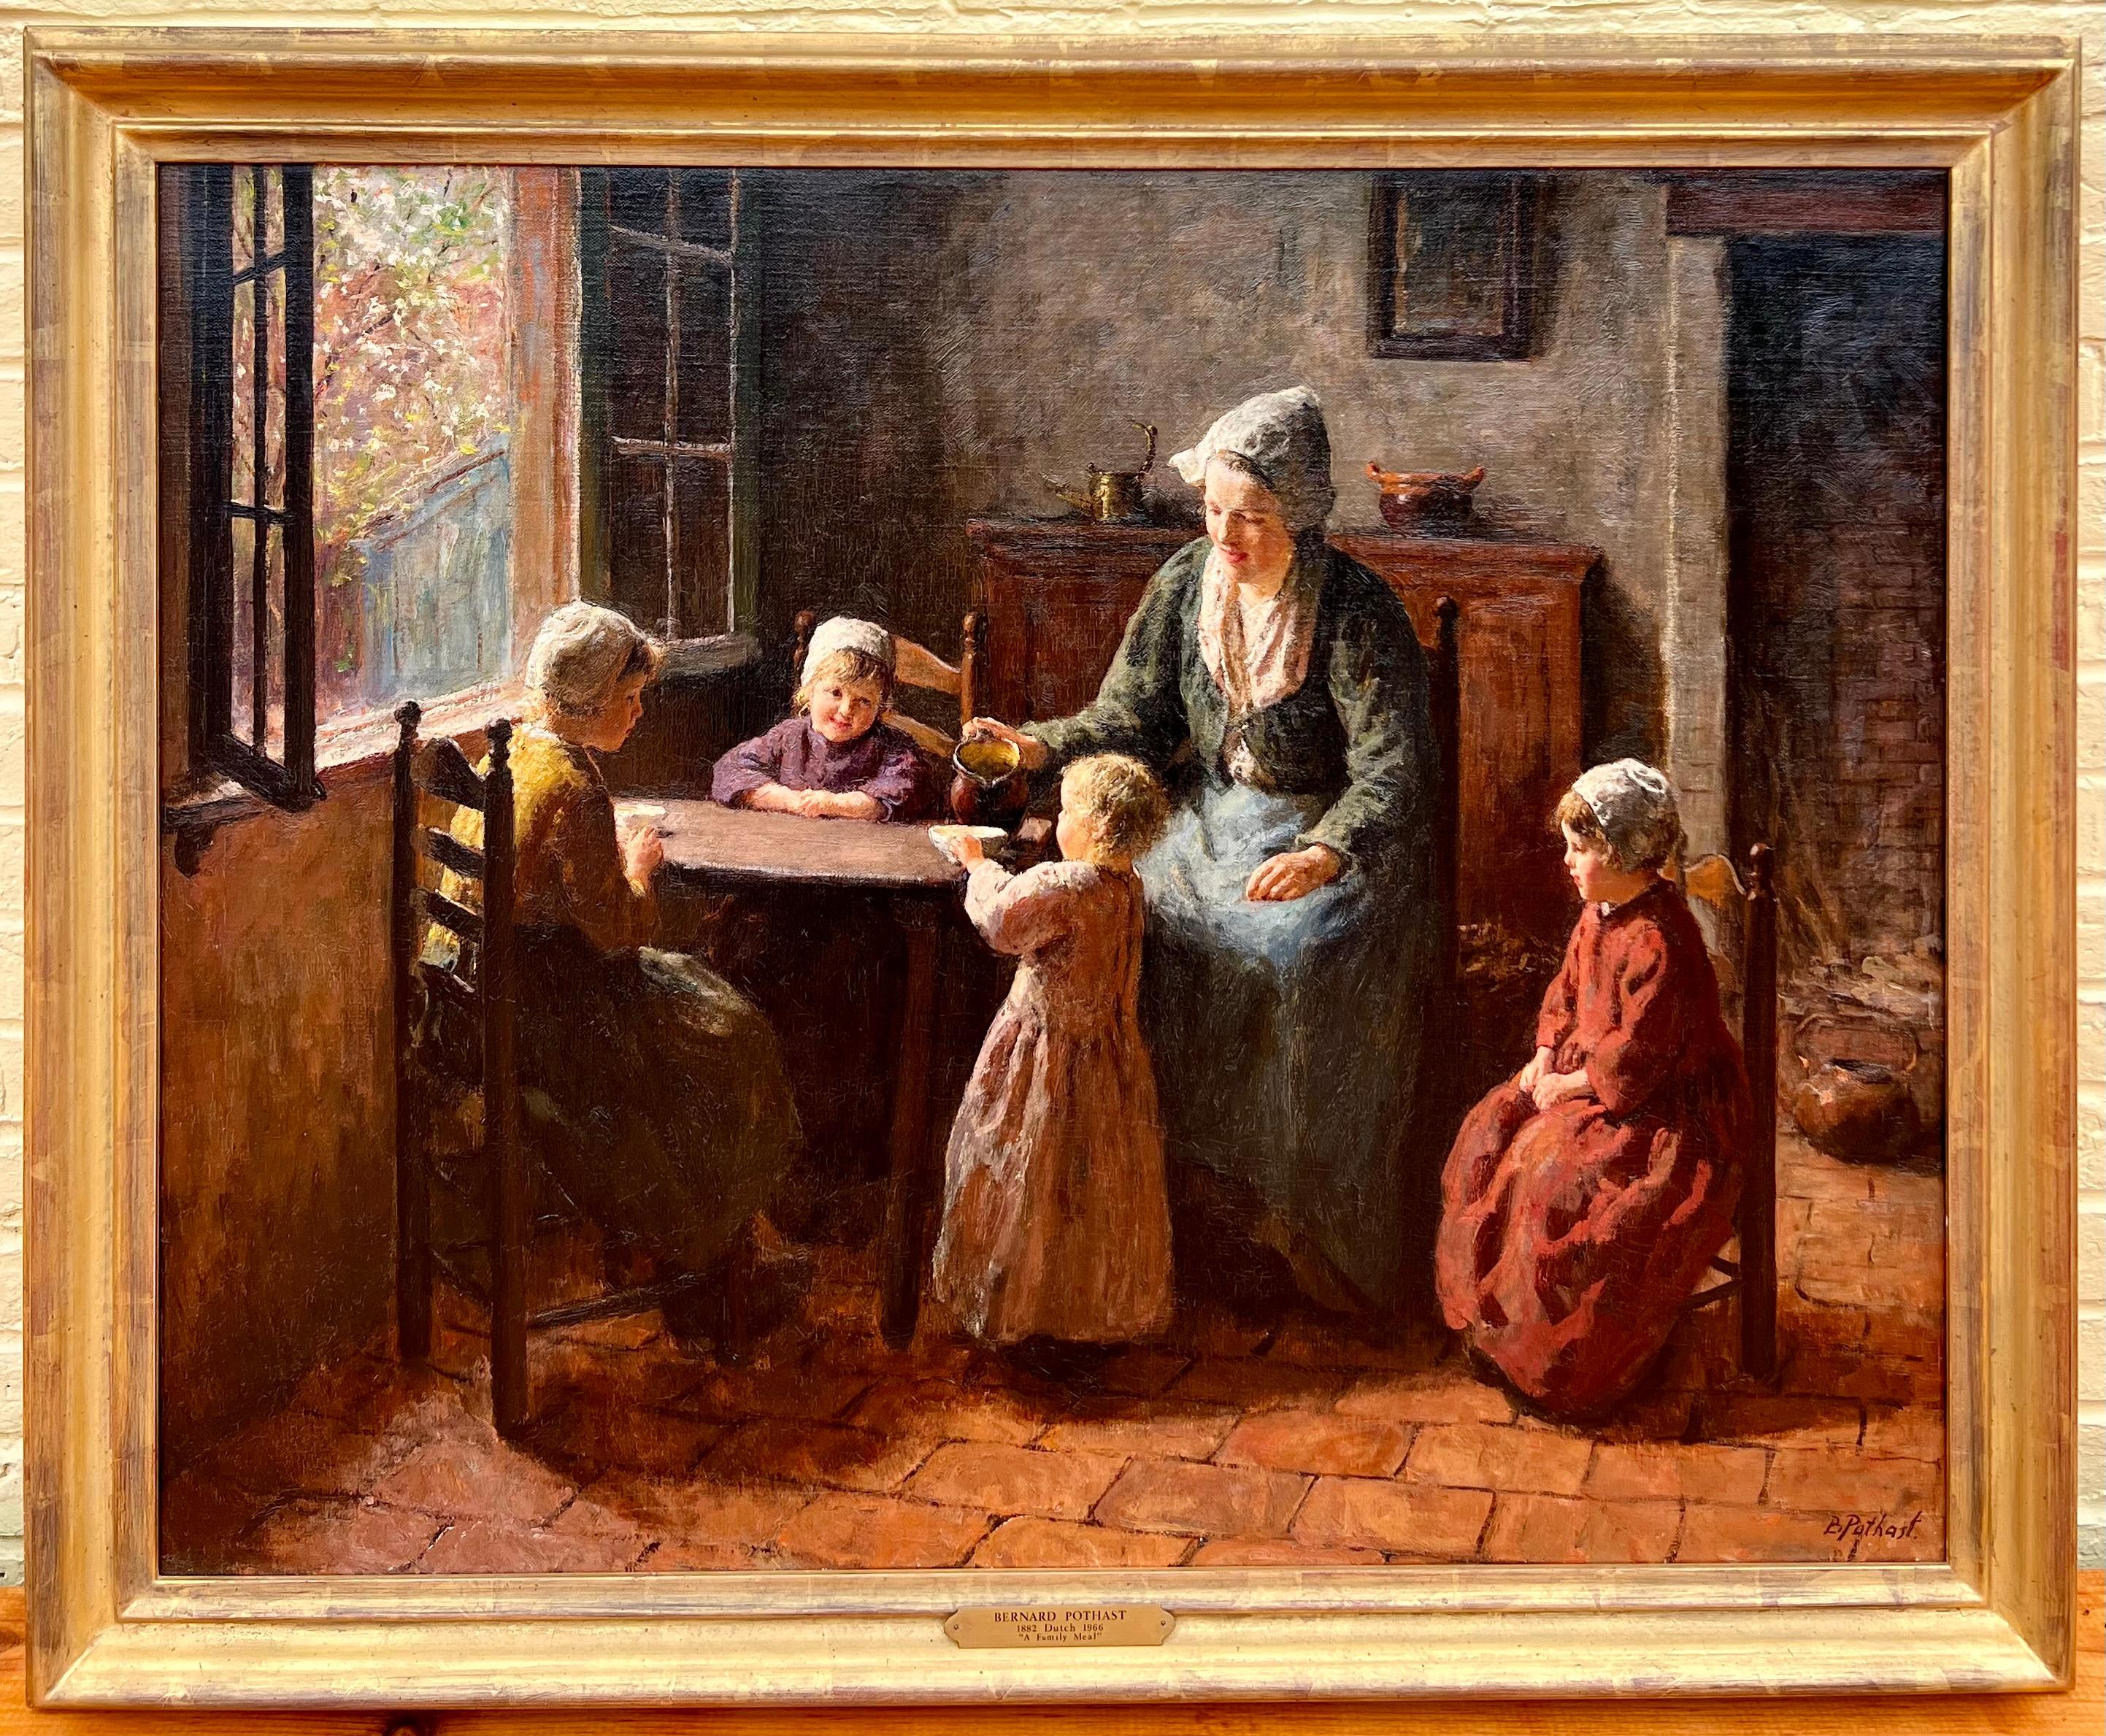 This is an original unique oil painting by the artist Bernard Pothast, signed in the lower right corner, featuring a mother and her children sitting around the kitchen table.  

Provenance:
Sold Sothebys London Lot 190, 1989 for $24,000
Private